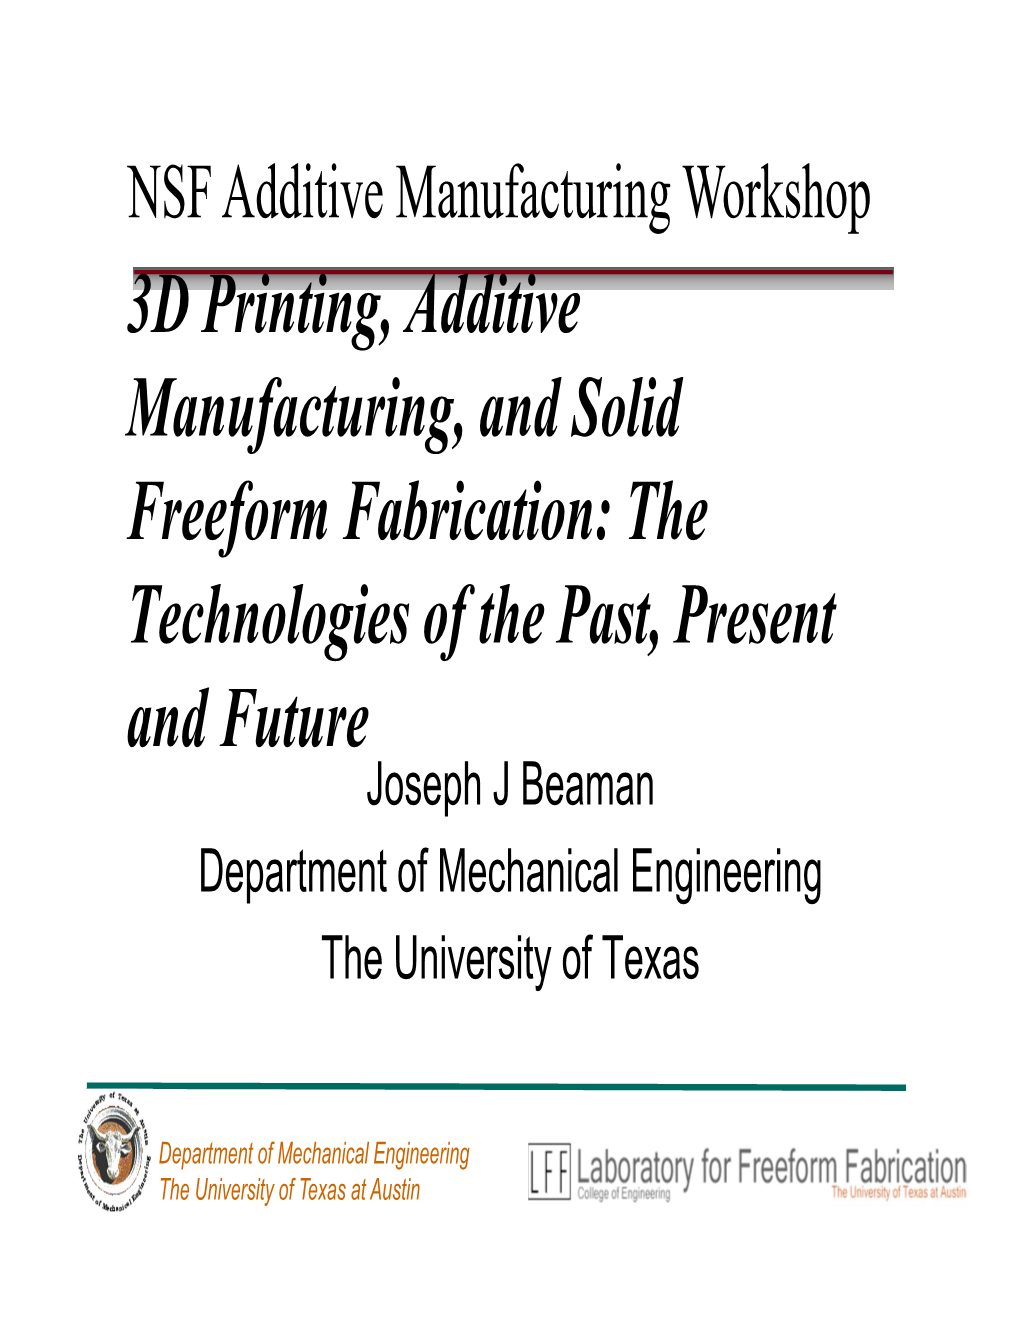 3D Printing, Additive Manufacturing, and Solid Freeform Fabrication: the Technologies of the Past, Present and Future